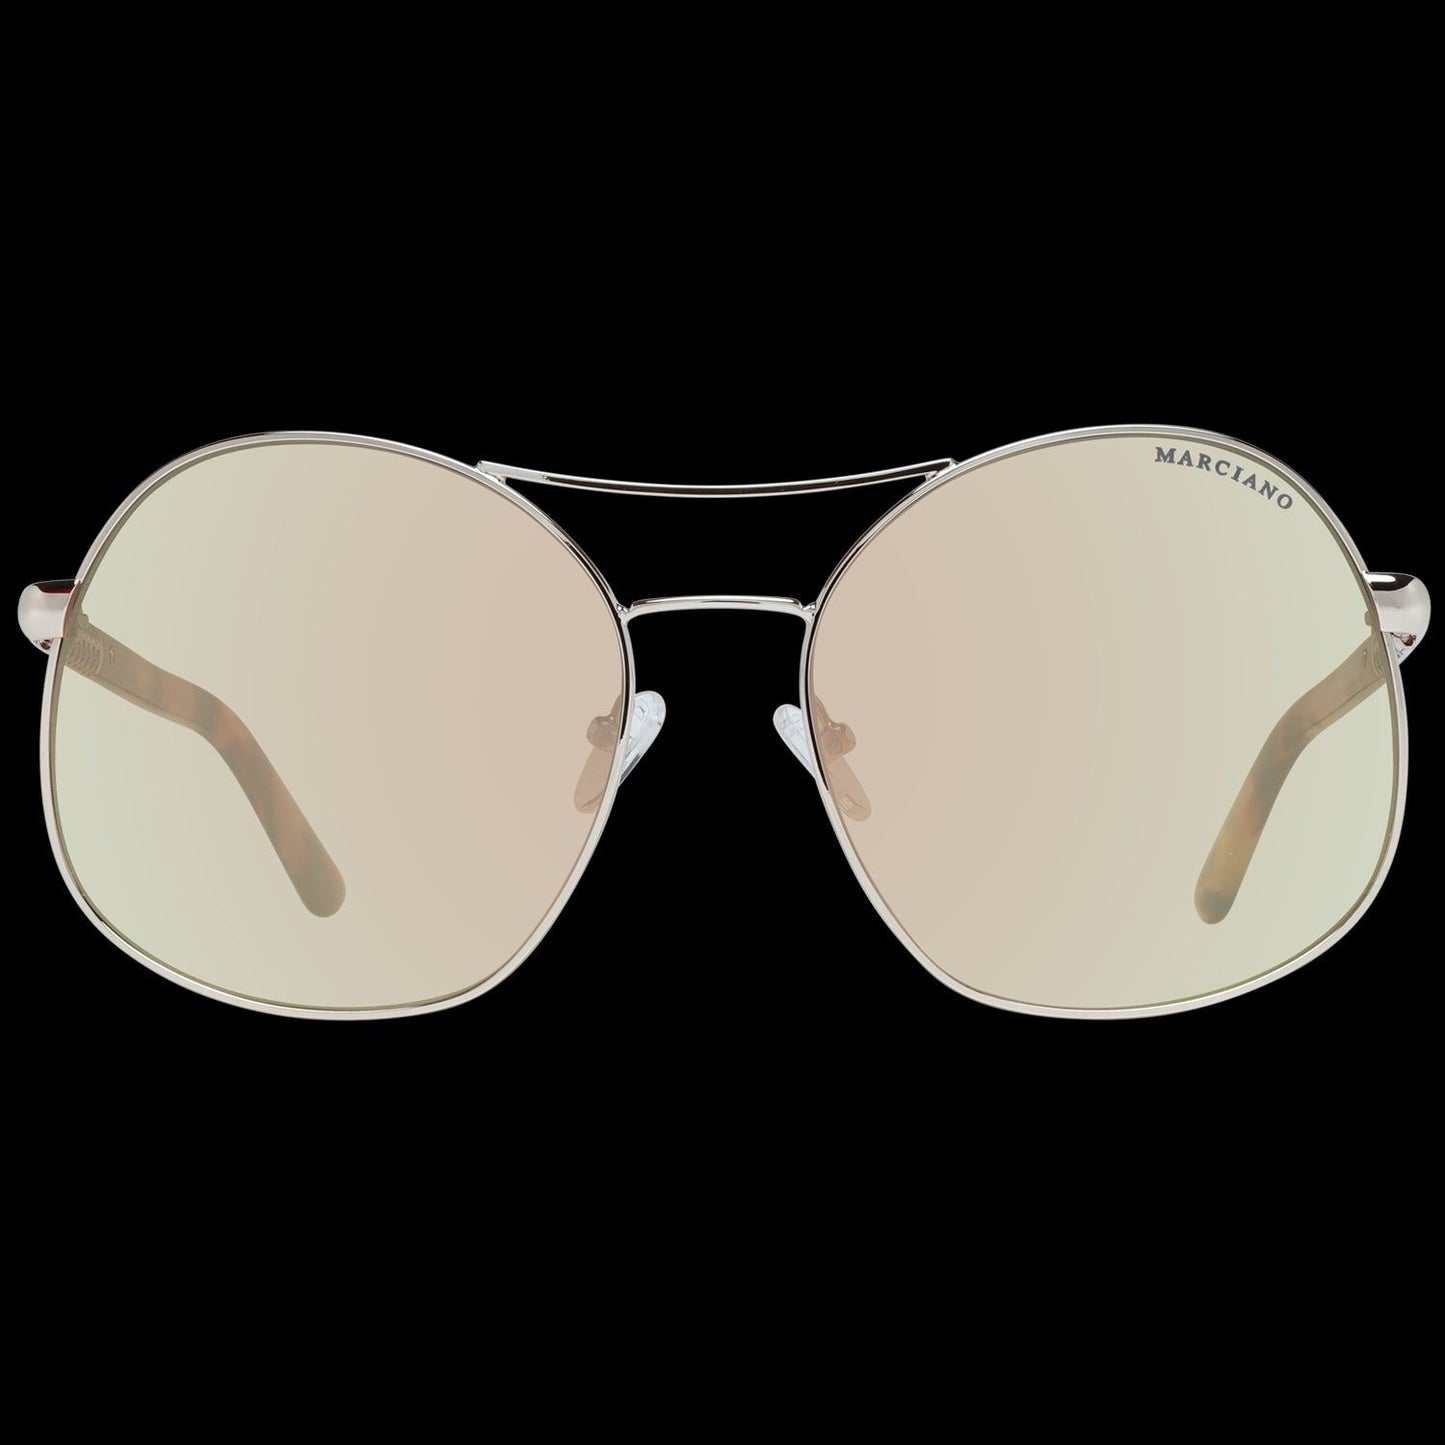 MARCIANO By GUESS SUNGLASSES MARCIANO BY GUESS MOD. GM0807 6232B SUNGLASSES & EYEWEAR marciano-by-guess-mod-gm0807-6232b